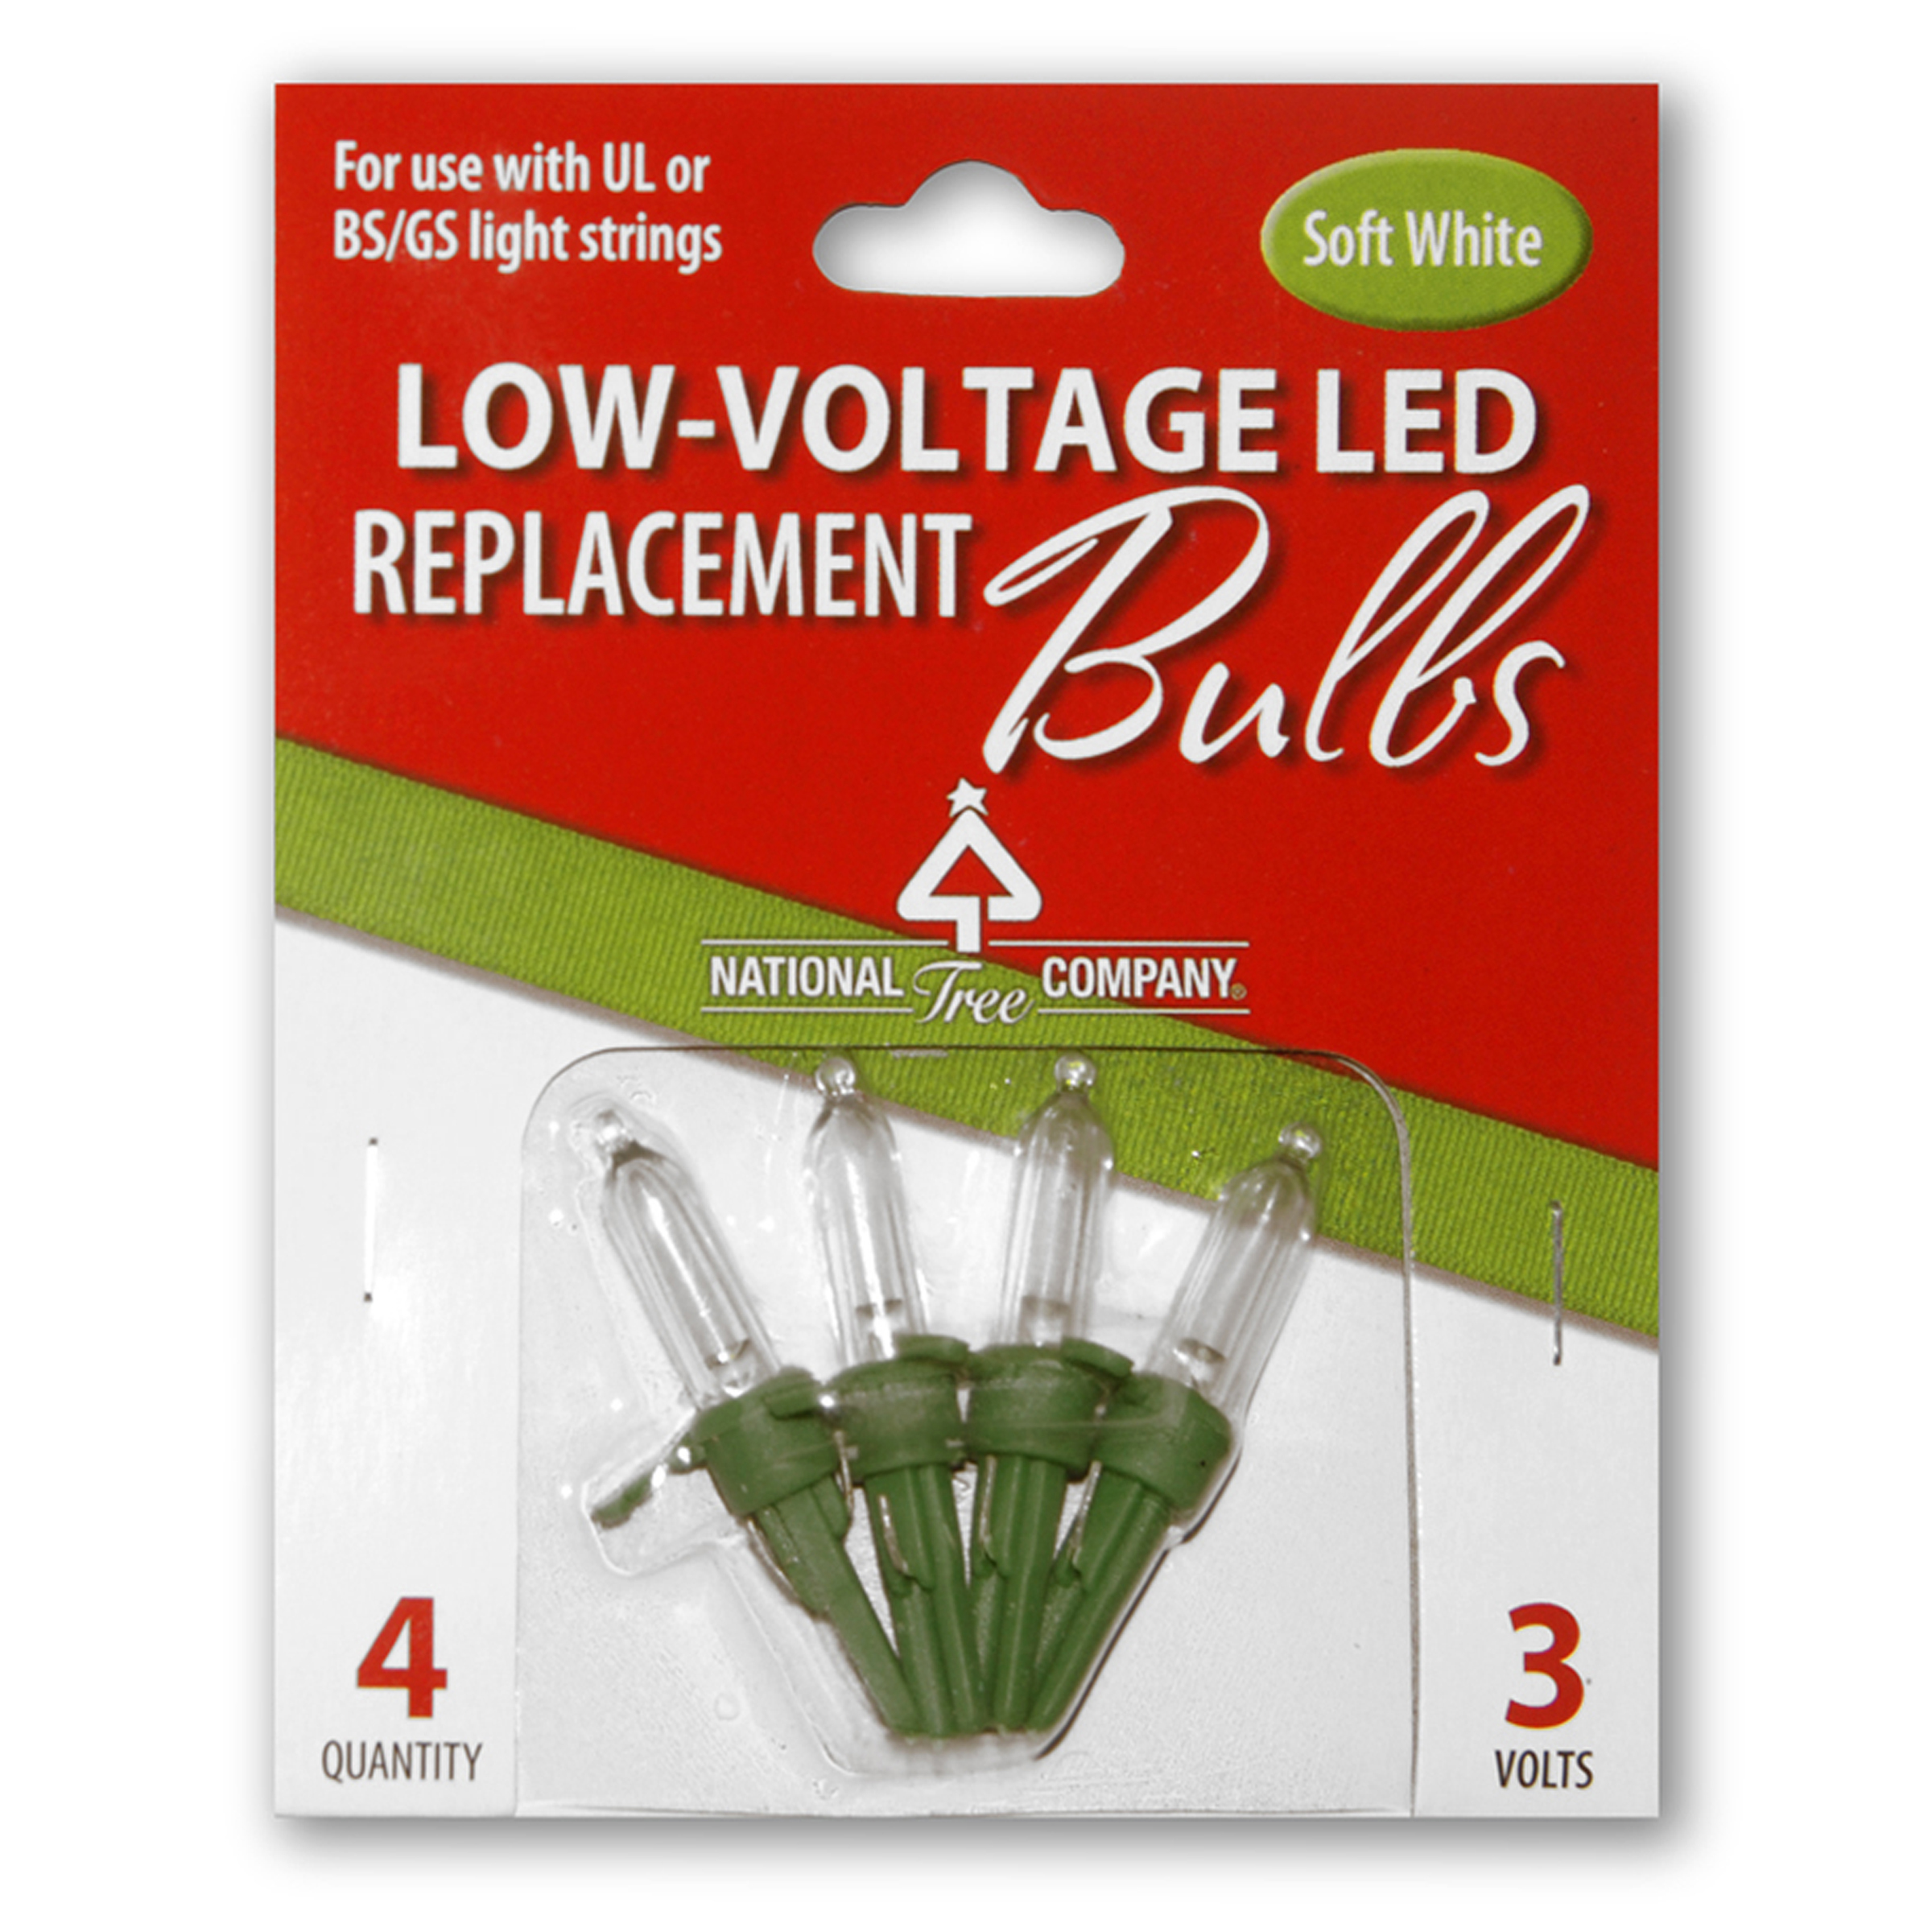 Replacement Soft White LED Bulbs - image 1 of 3